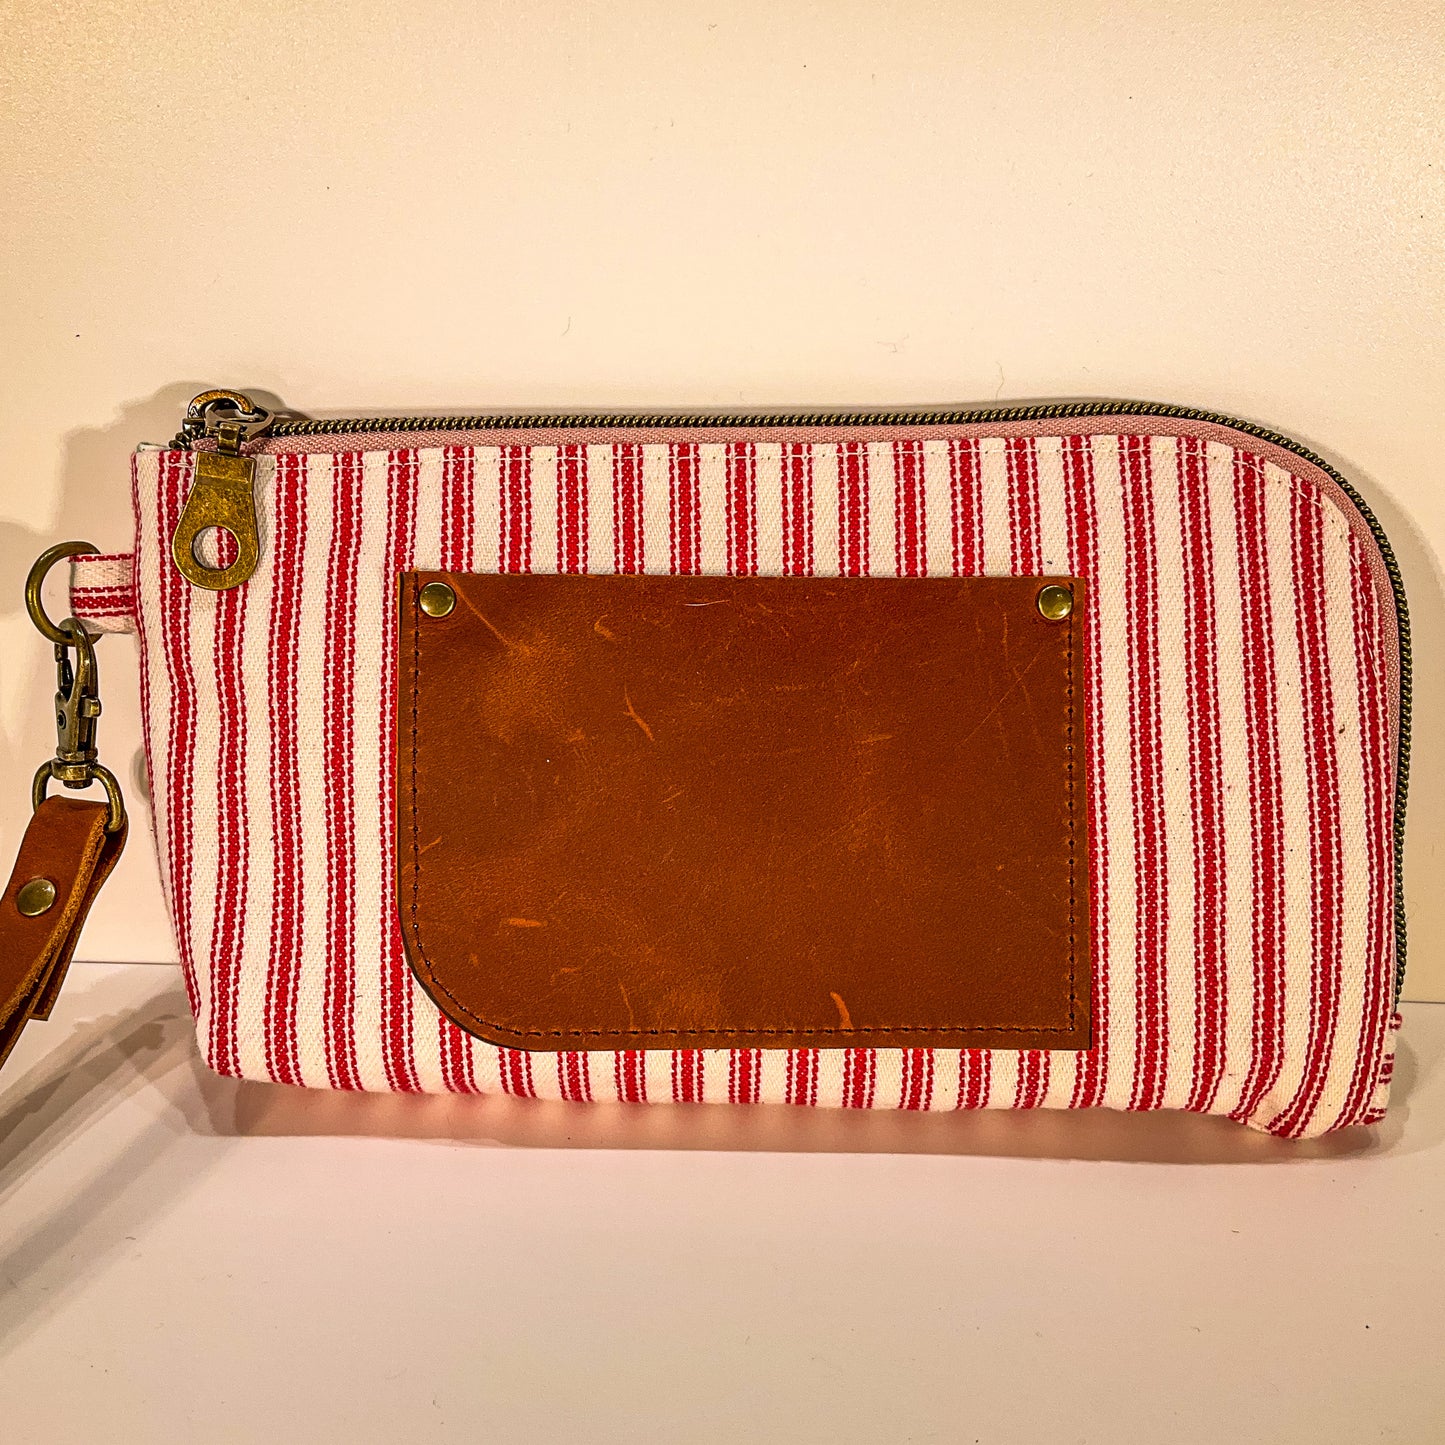 Yarrow Wristlet - Classic Ticking in Cherry with Dark Brown Leather Pocket #16